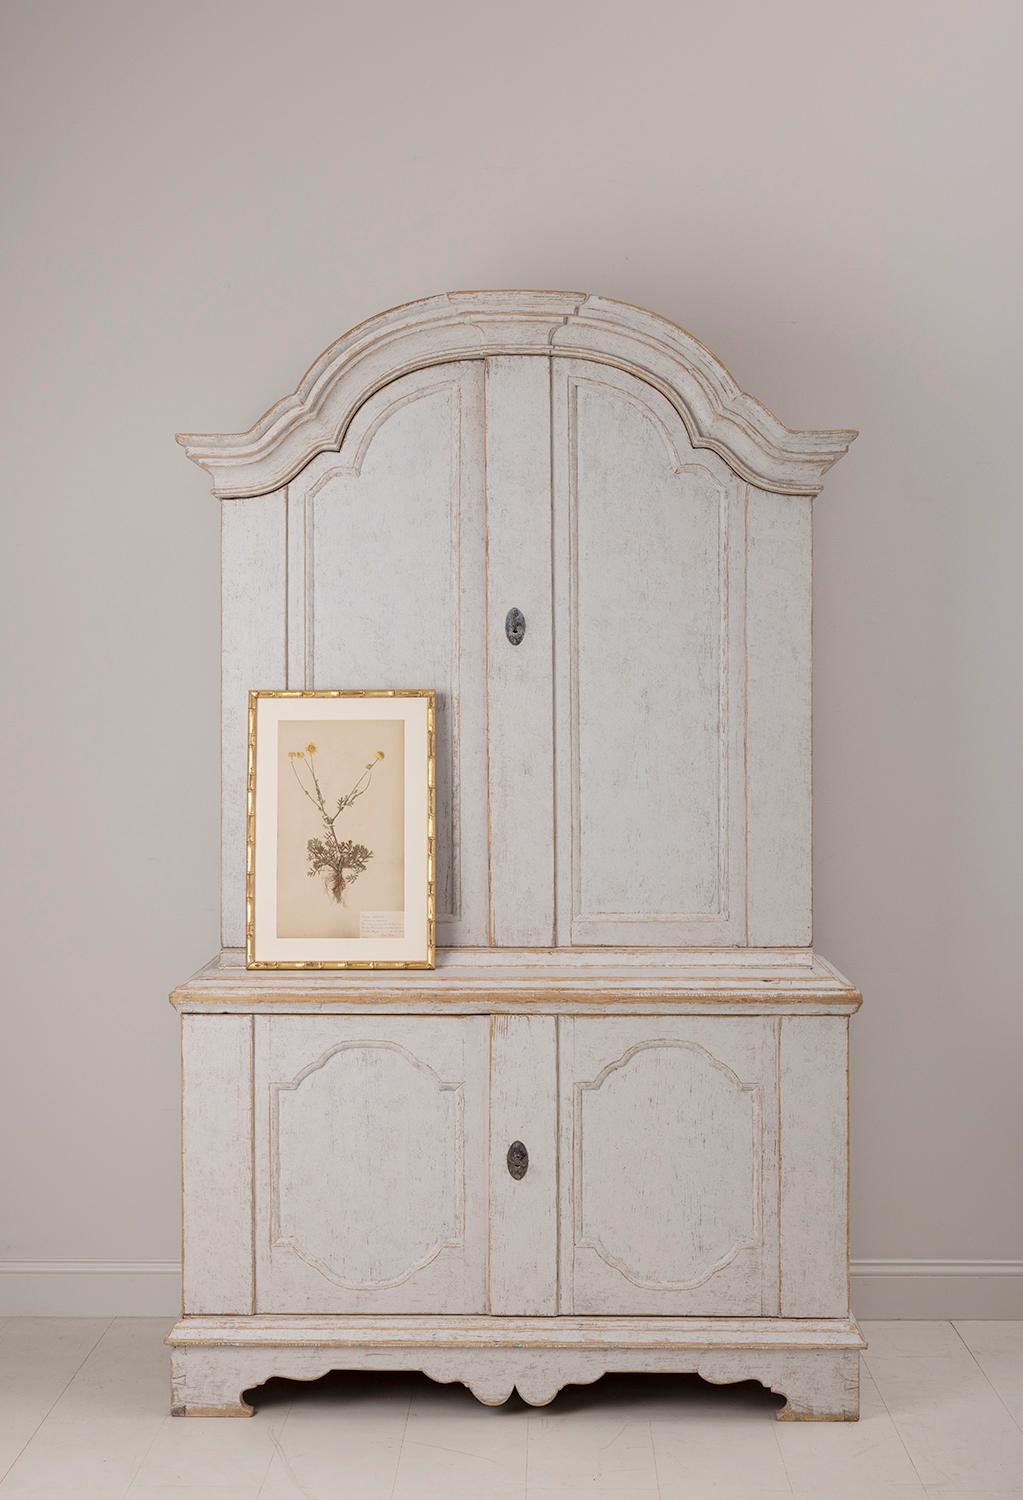 An 18th century two-part Swedish linen press or armoire from the Rococo period. Provenance on the inside doors dates piece to 1796 and 1826. This period Rococo marriage cabinet is from Värmland and is known as a 